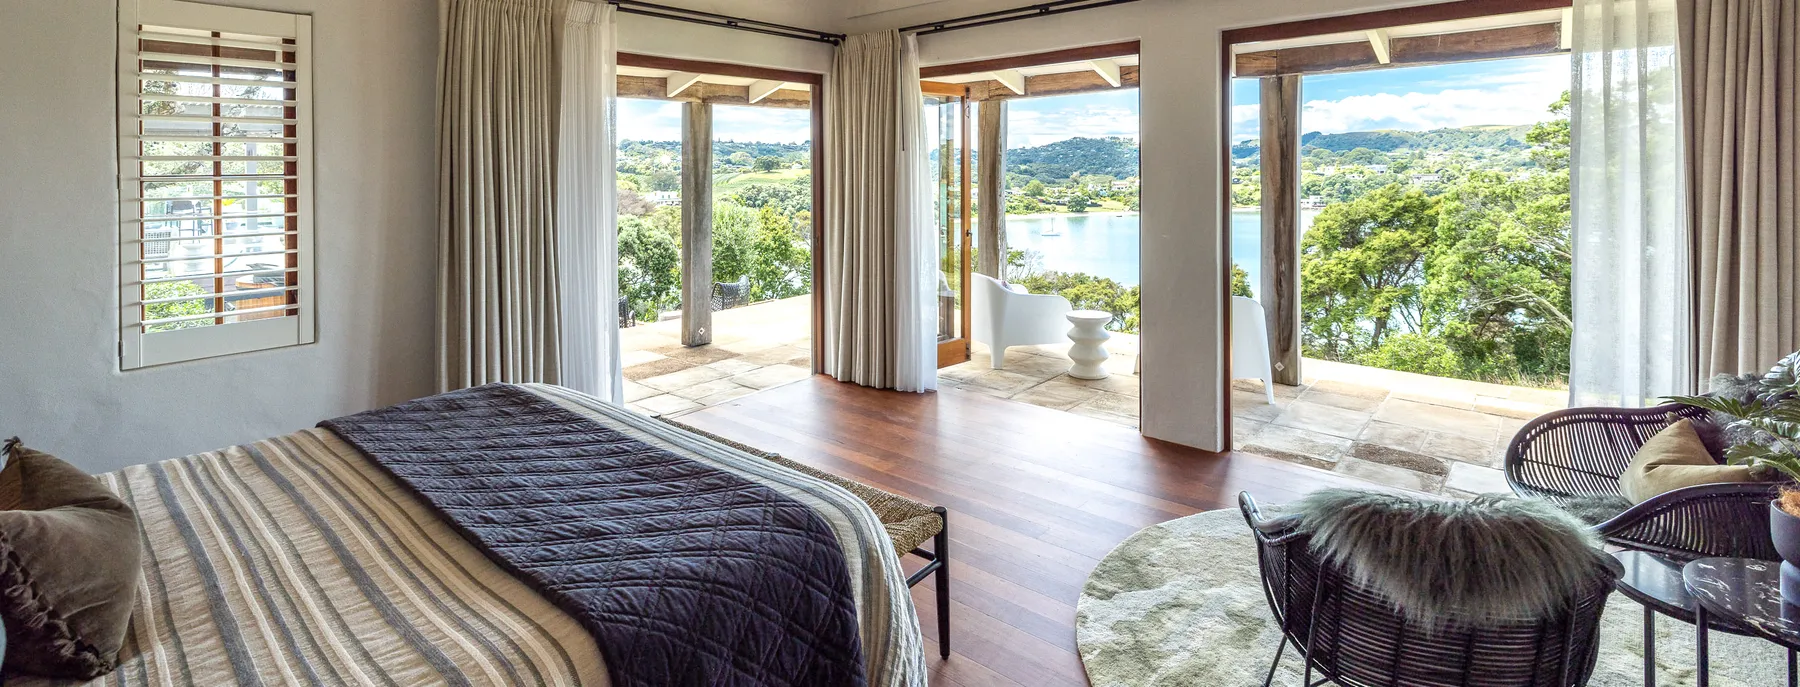 Photo of master bedroom looking out over the bay